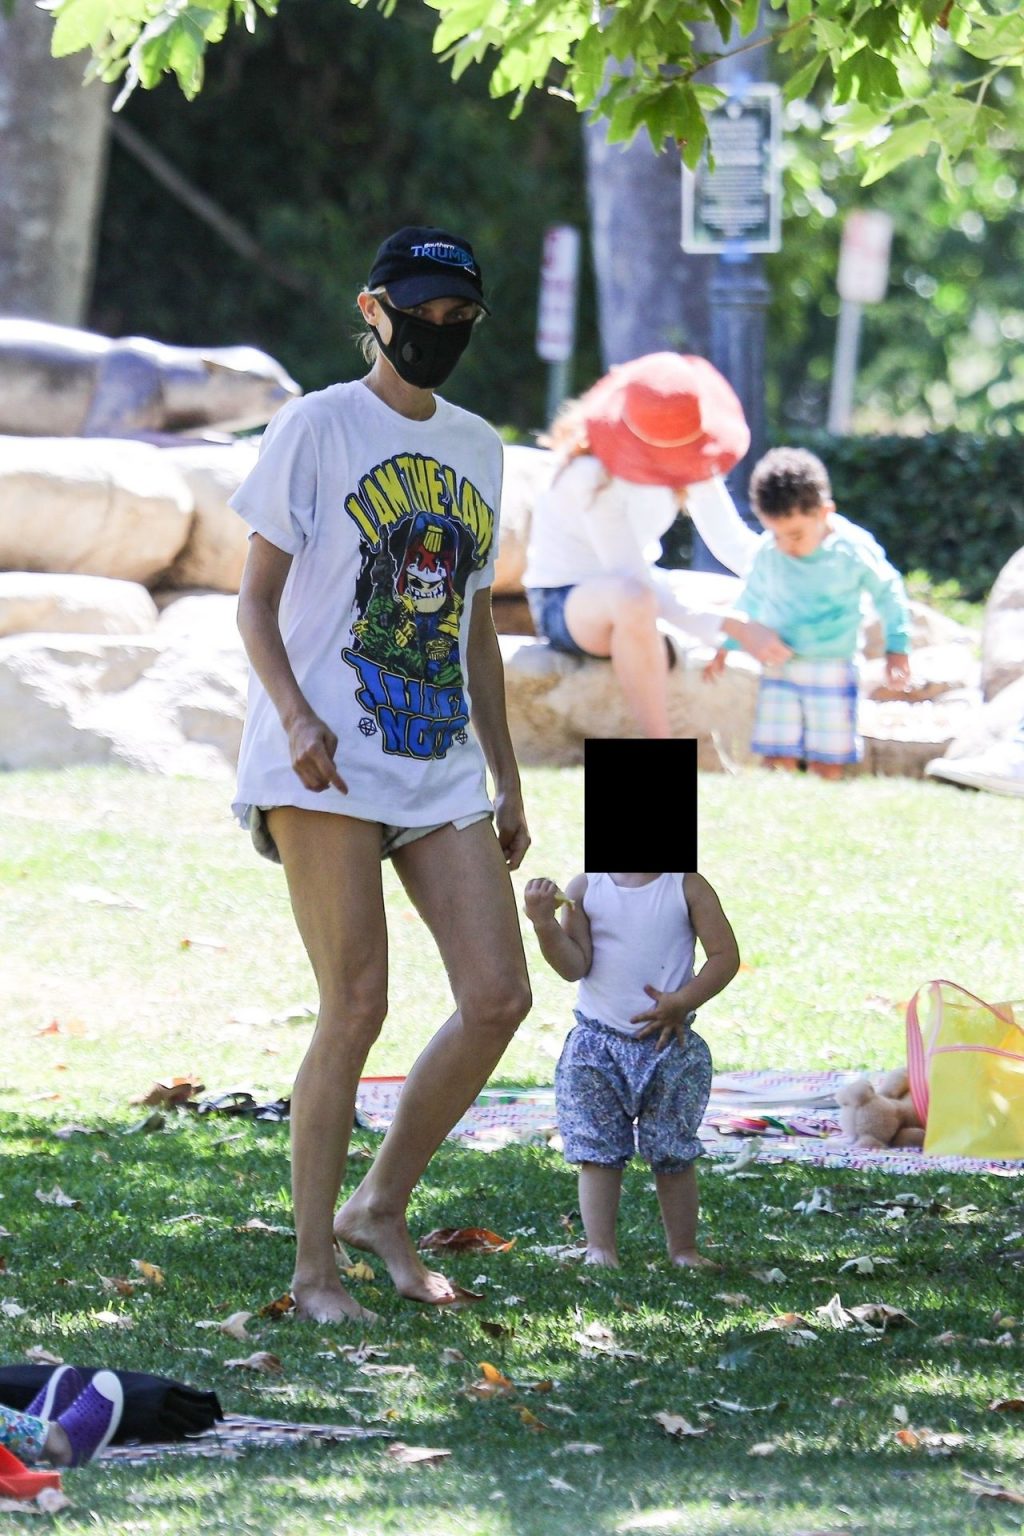 Diane Kruger Enjoys a Day at the Park with Her Daughter (42 Photos)